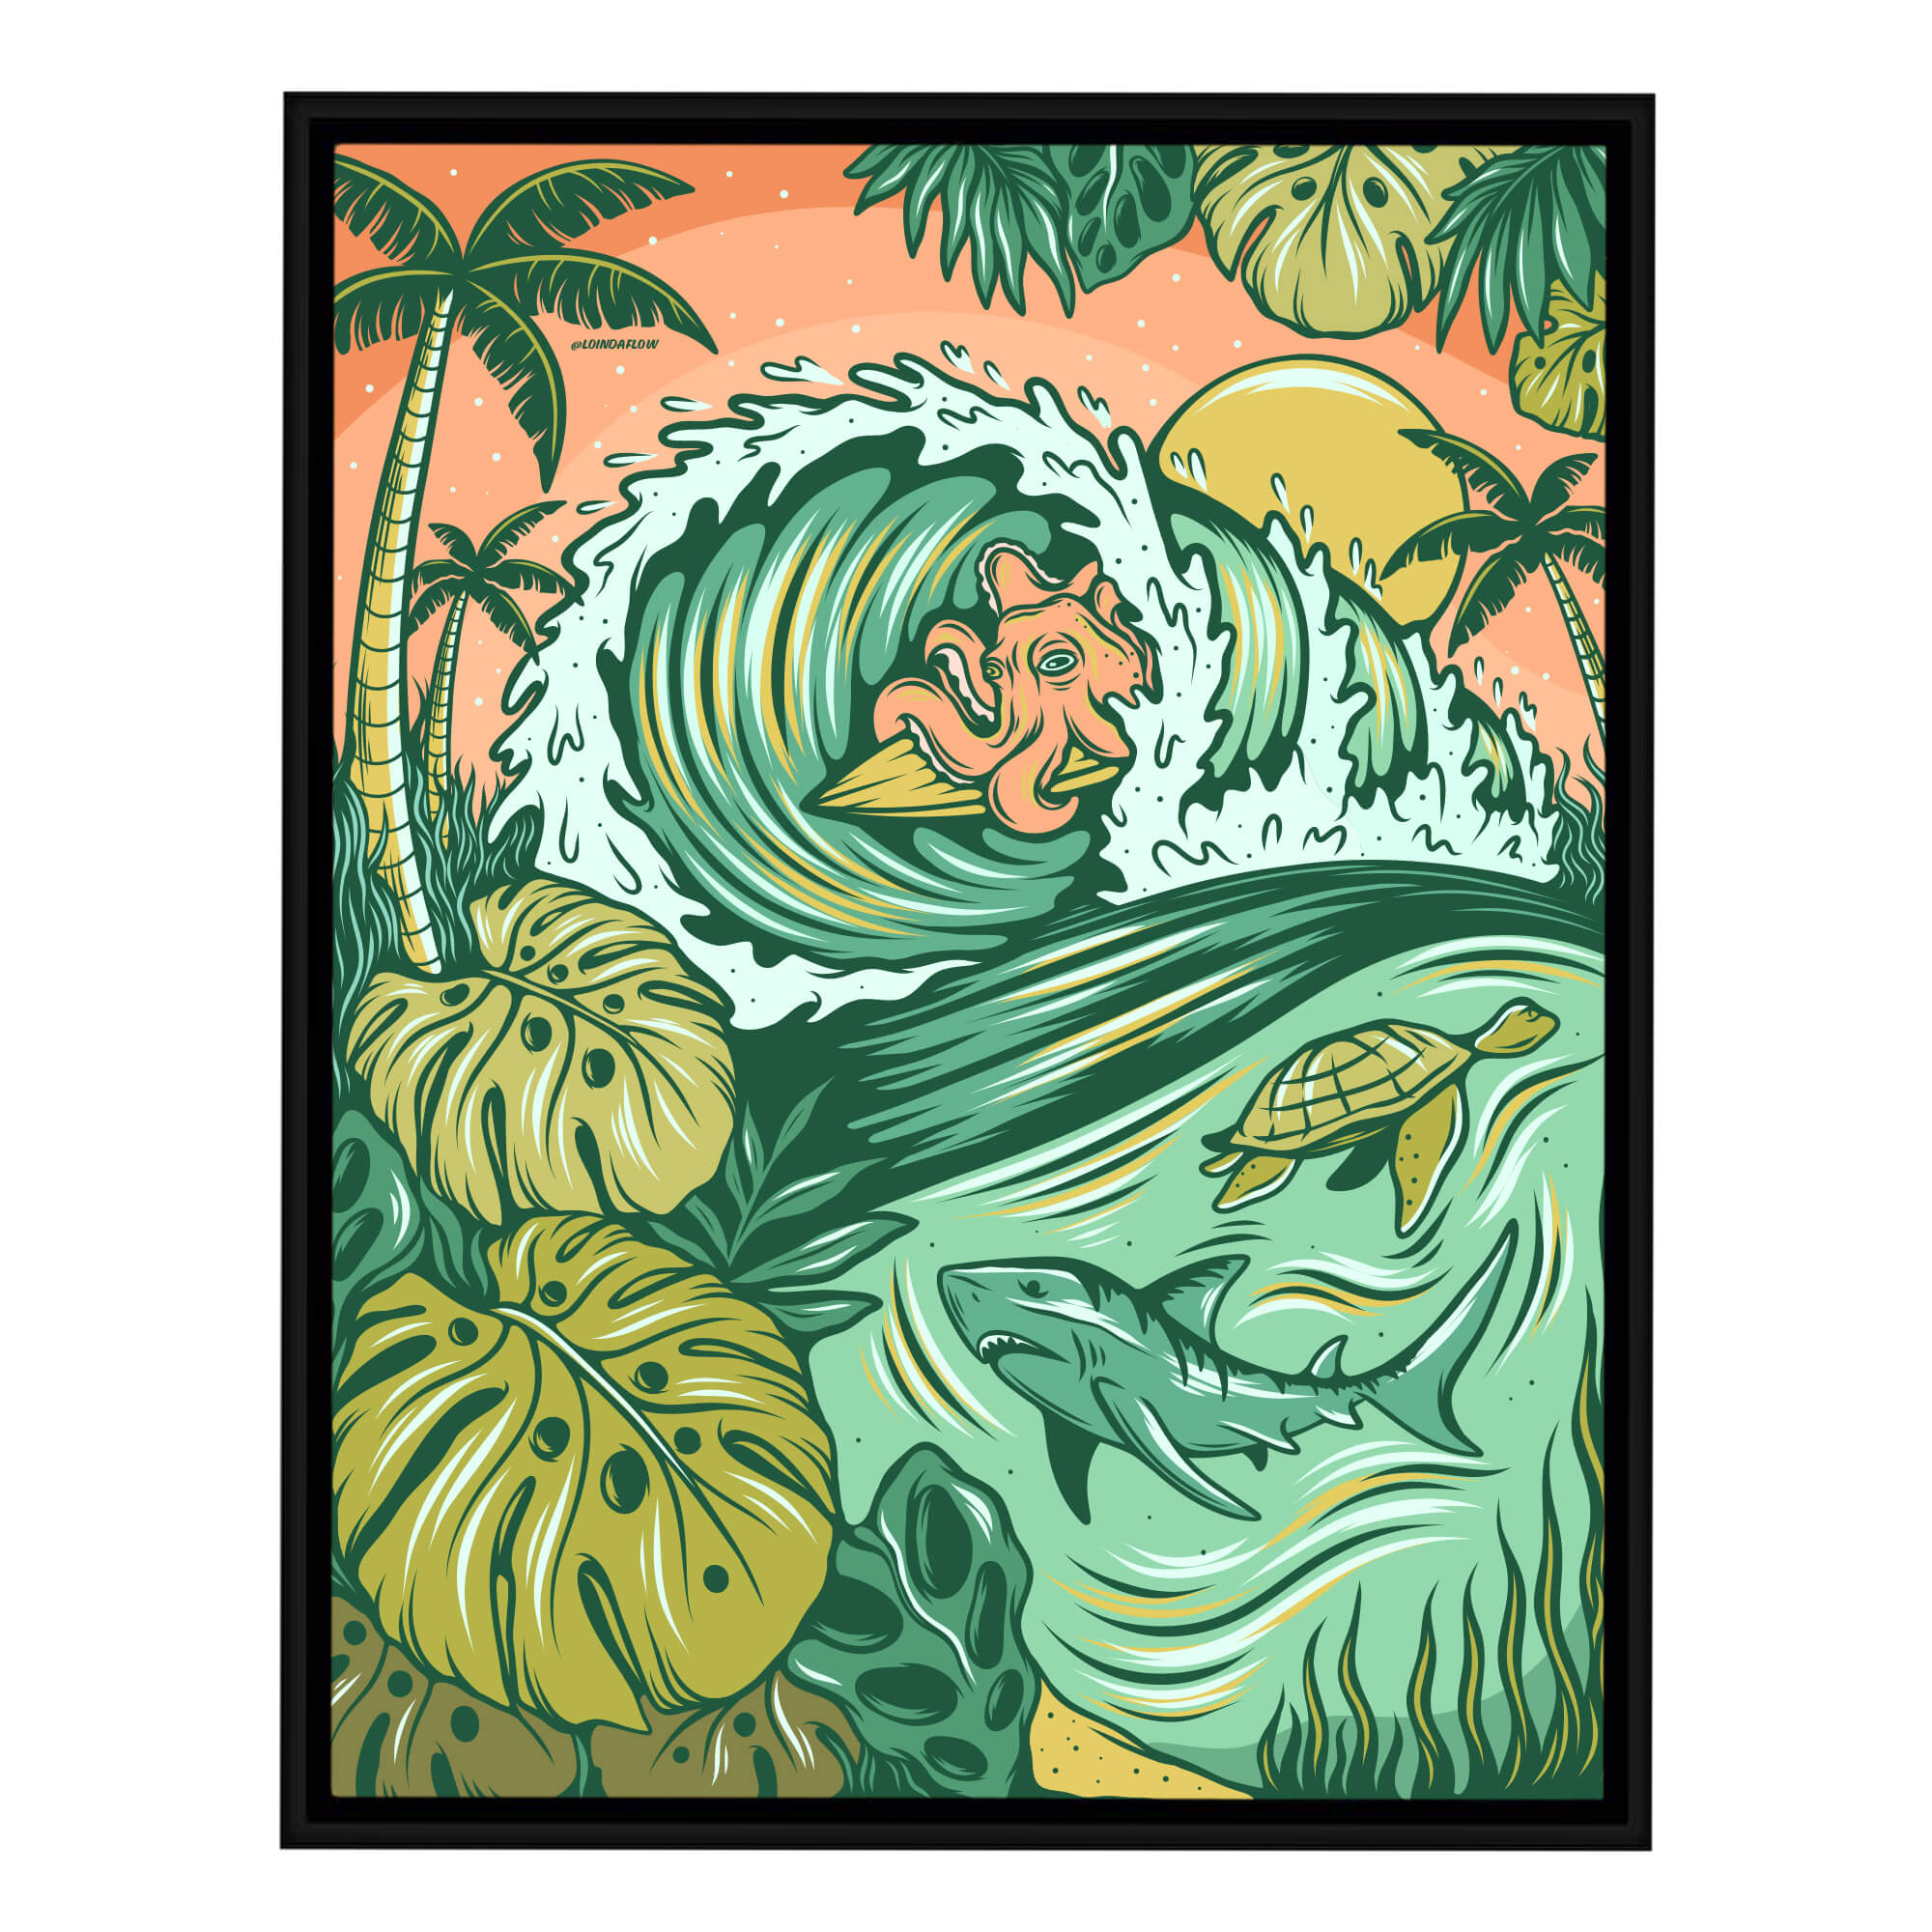 Canvas art print featuring some monstera leaves framing the ocean with large crashing waves with surfers by Hawaii artist Laihha Organna